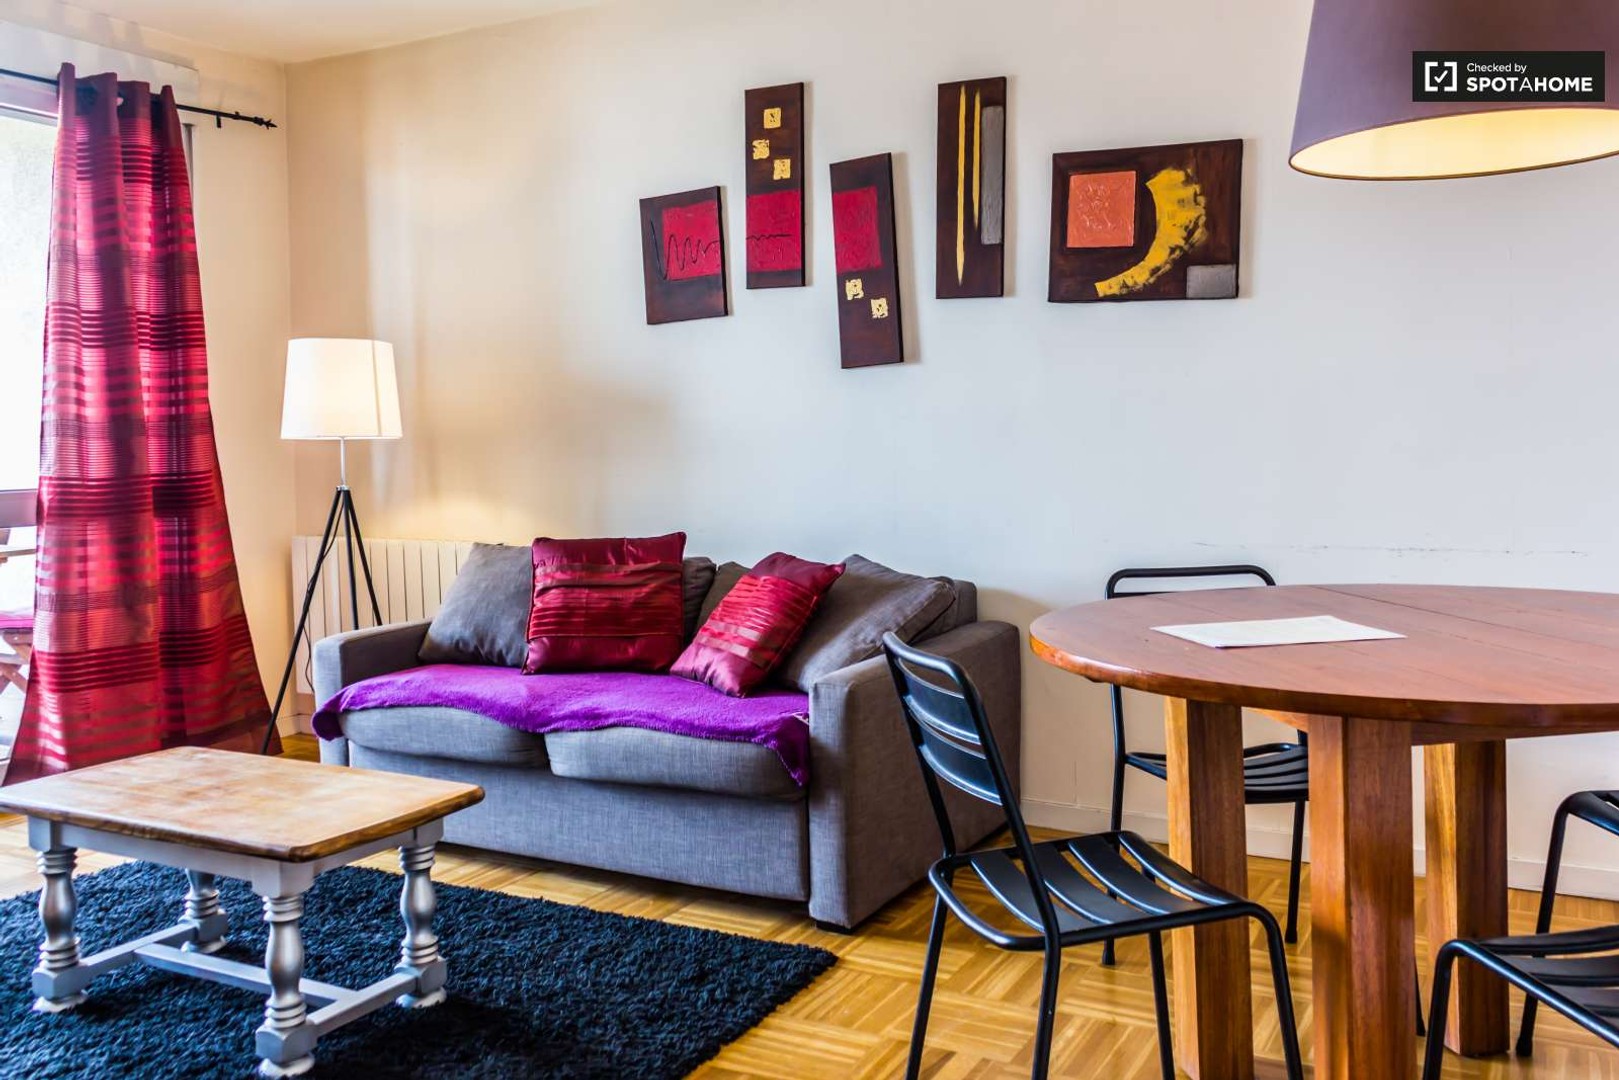 Accommodation in the centre of Lyon